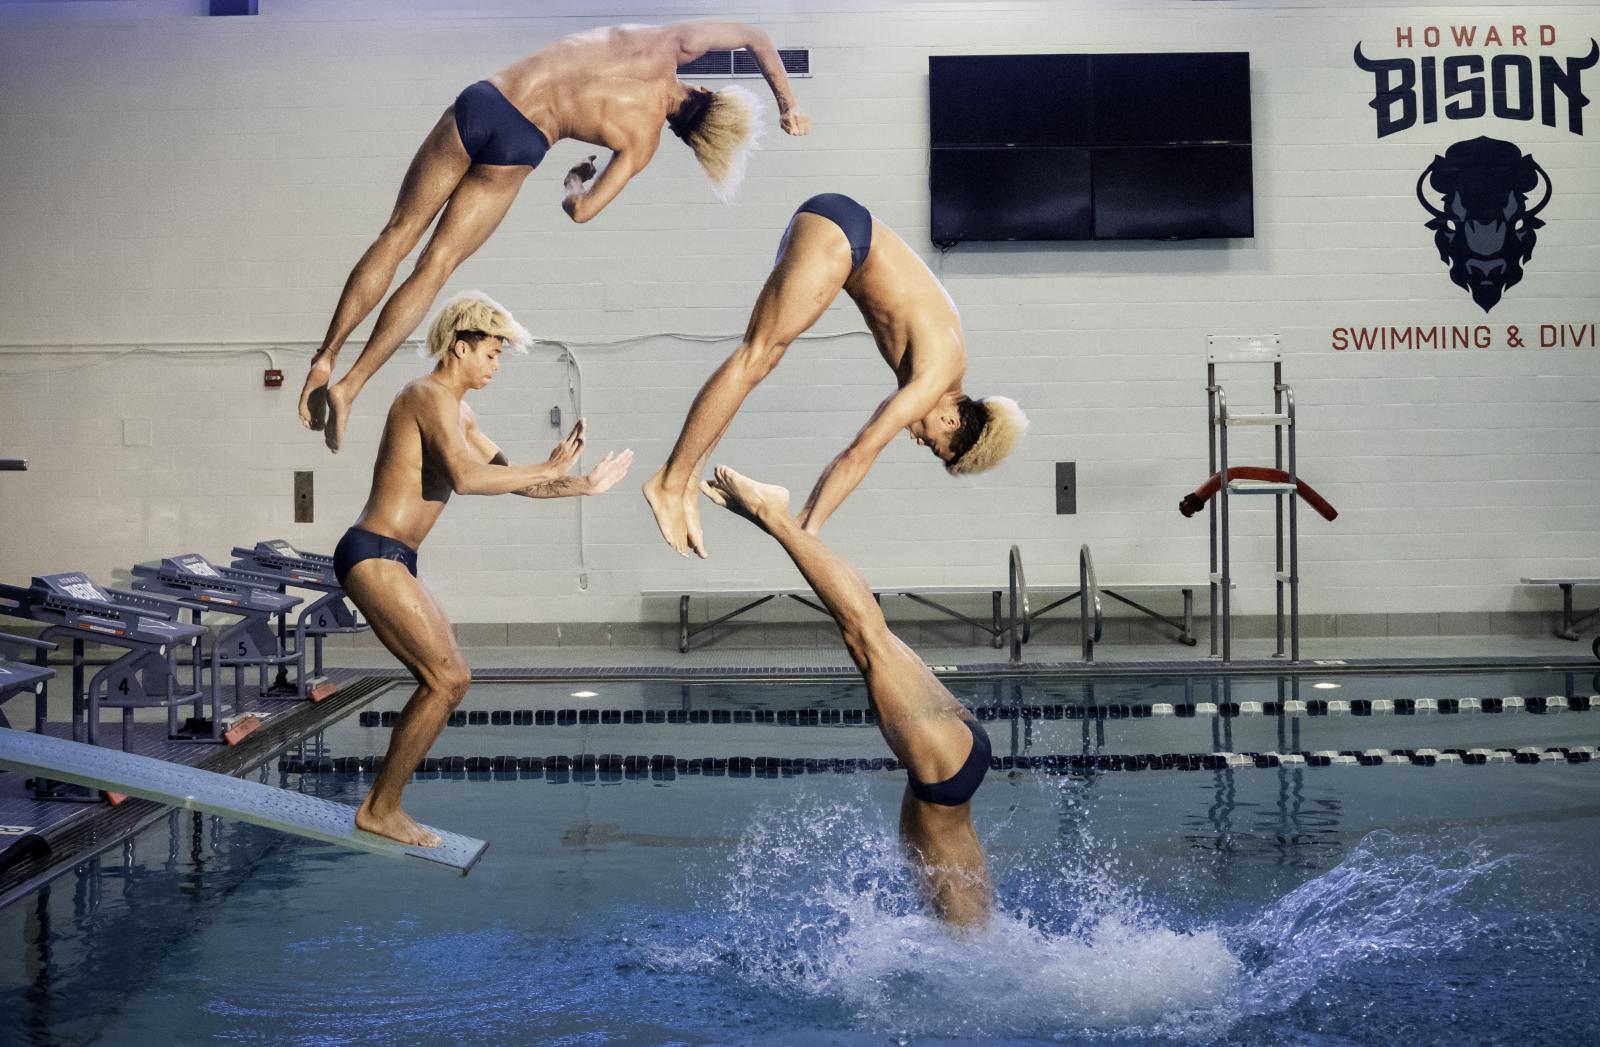 Multi-frame photo of swimmer diving into pool